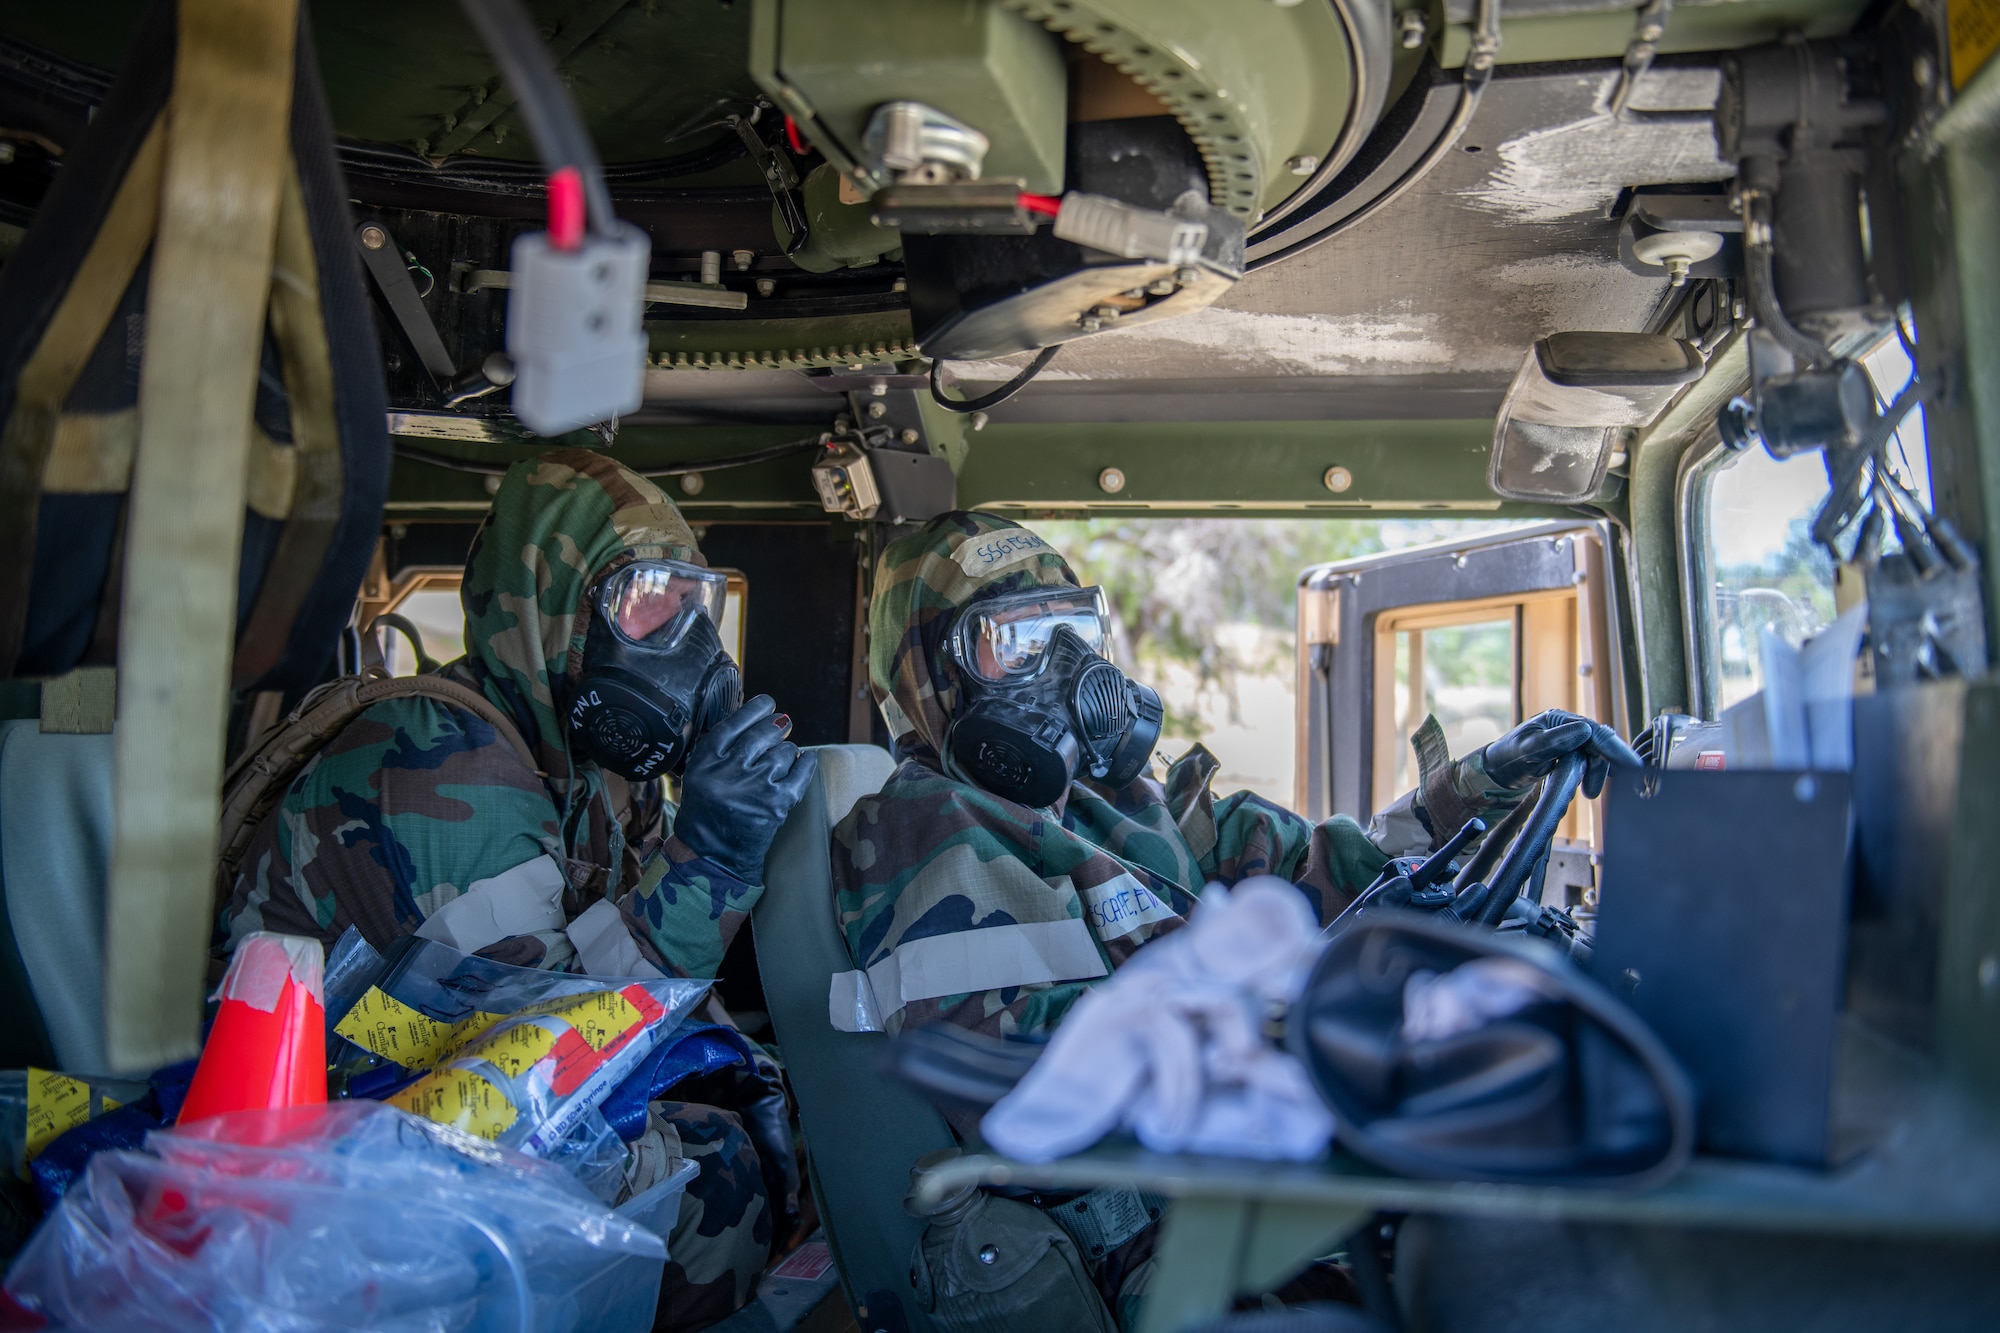 U.S. Air Force Senior Airman Codie Braegger, 419th Civil Engineer Squadron, and Staff Sgt. Eva Escape, 446th Civil Engineer Squadron, await instructions during a simulated gas contamination event at the Patriot Warrior exercise at Hill Air Force Base, Utah, June 11 2022.